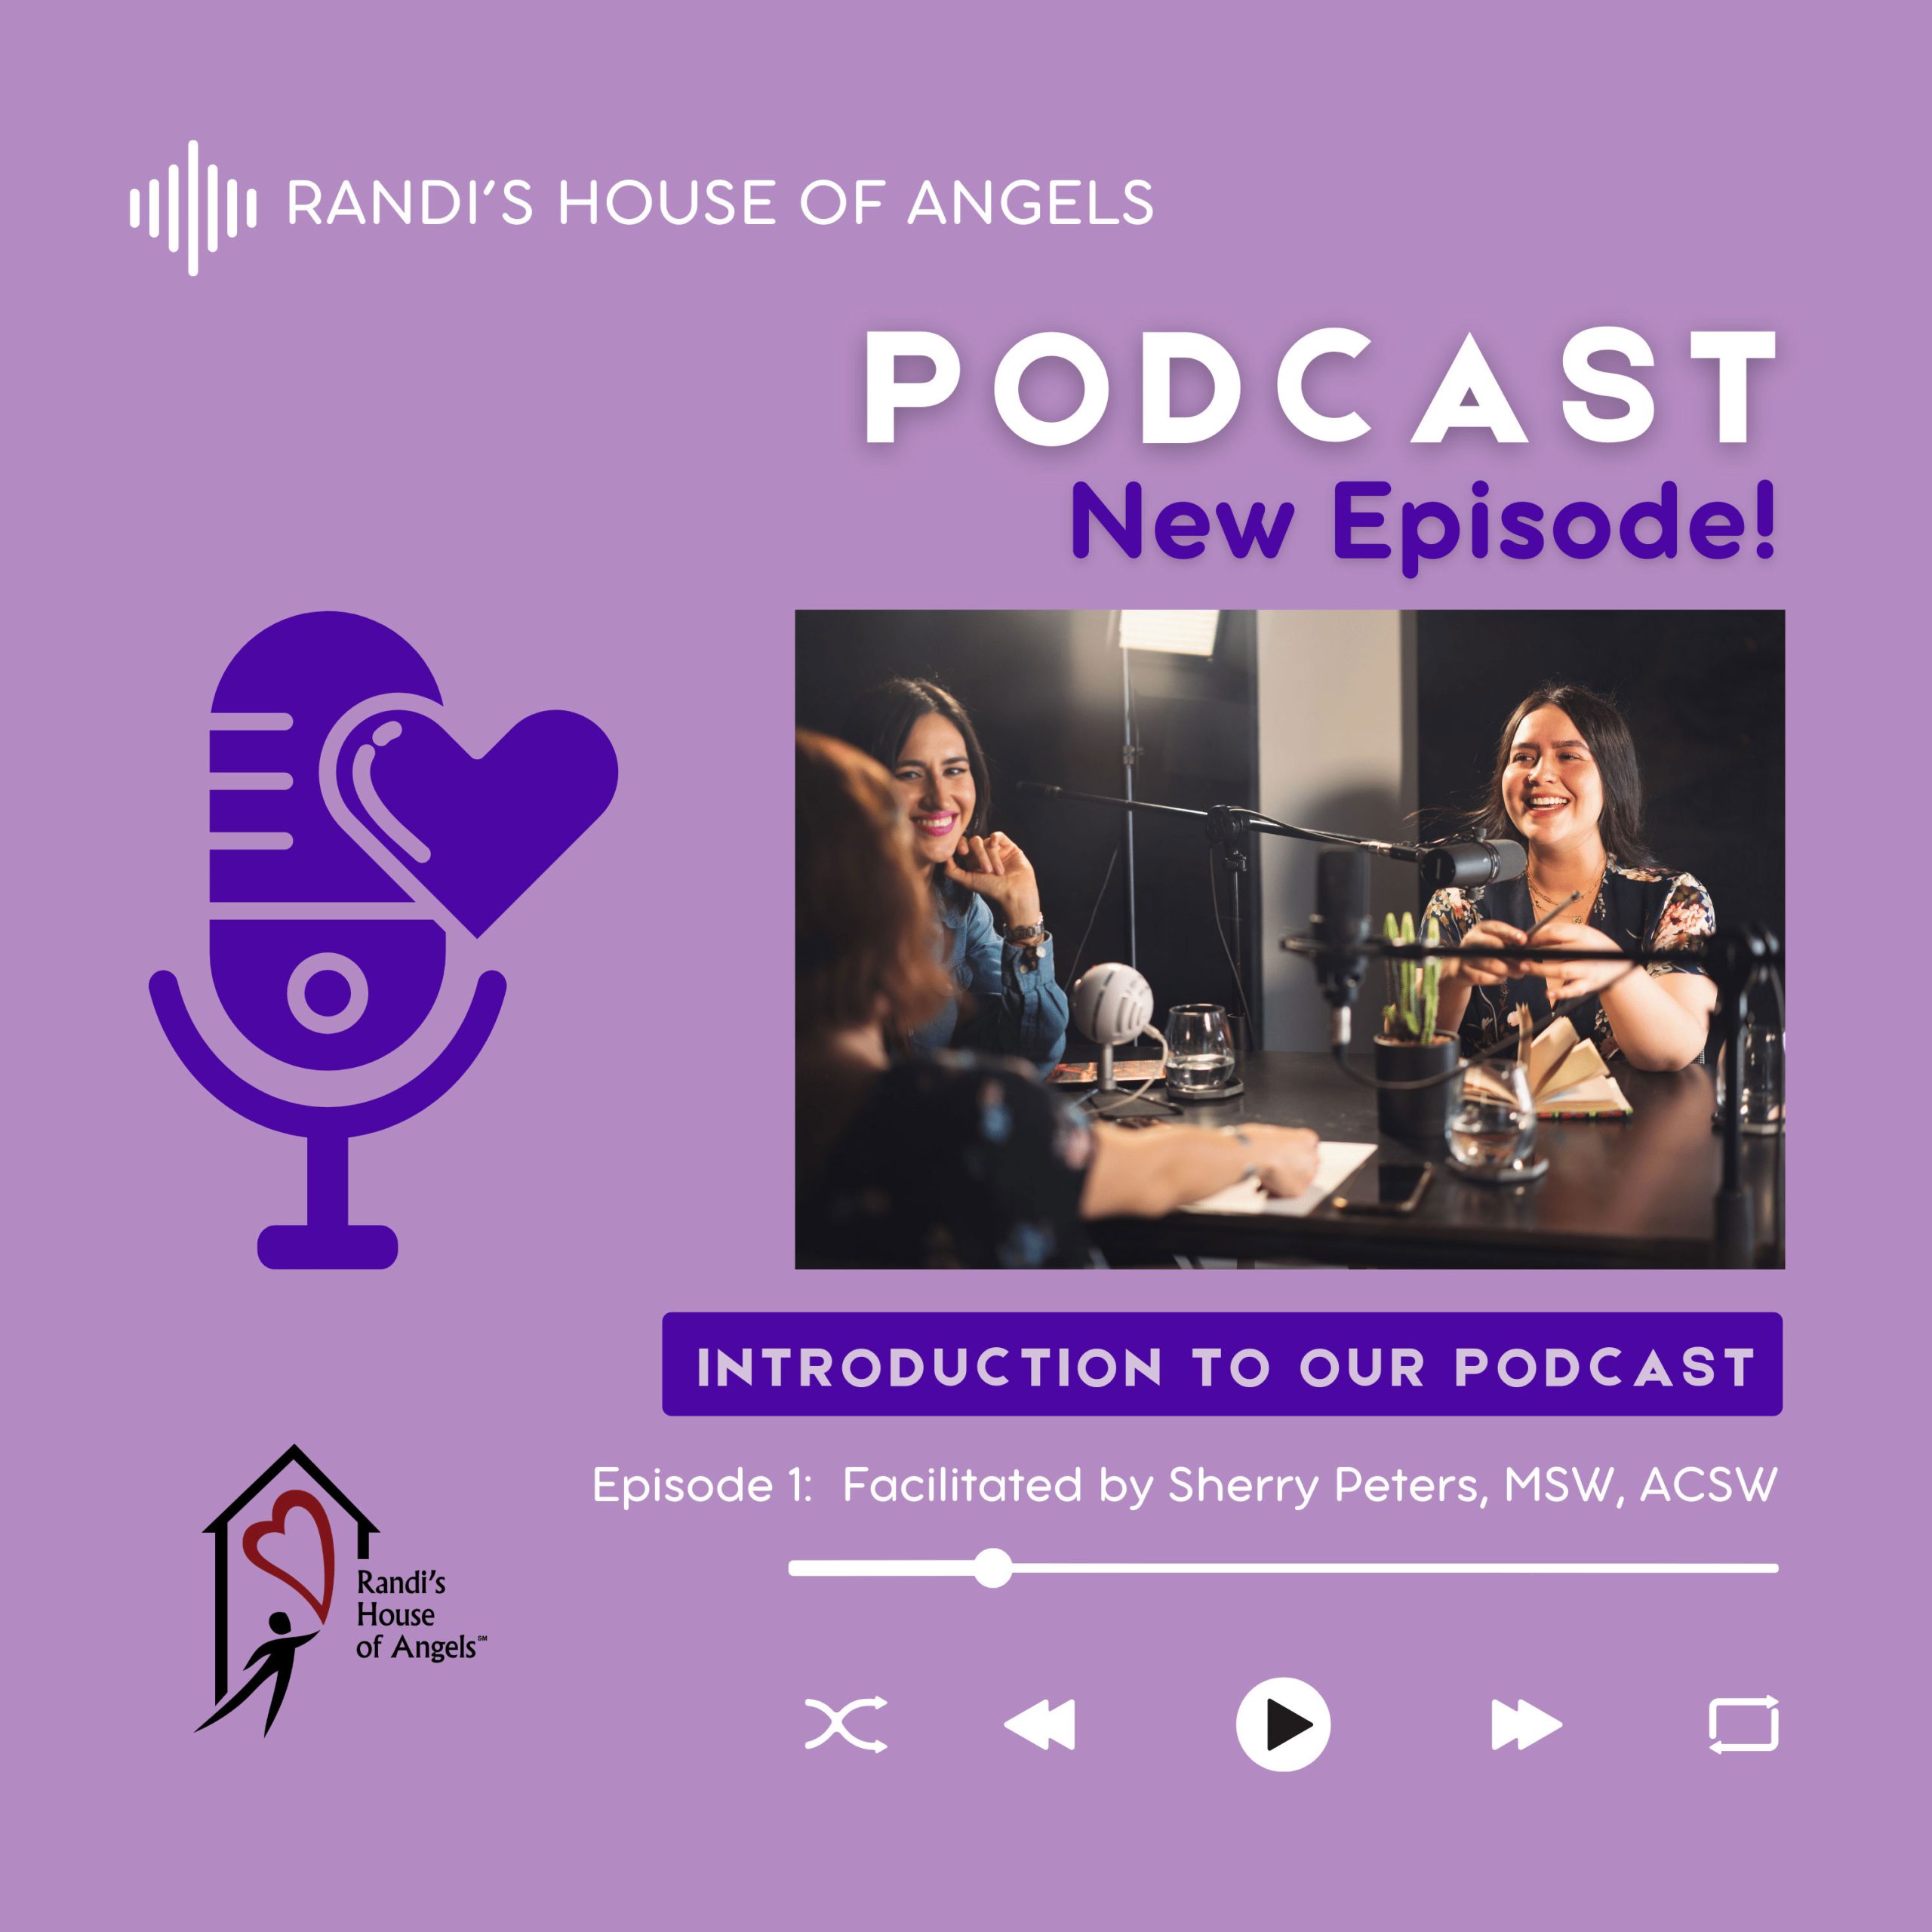 Randi's House of Angels (RHOA) Podcast Episode 1 - Introduction to our Podcast - cover art